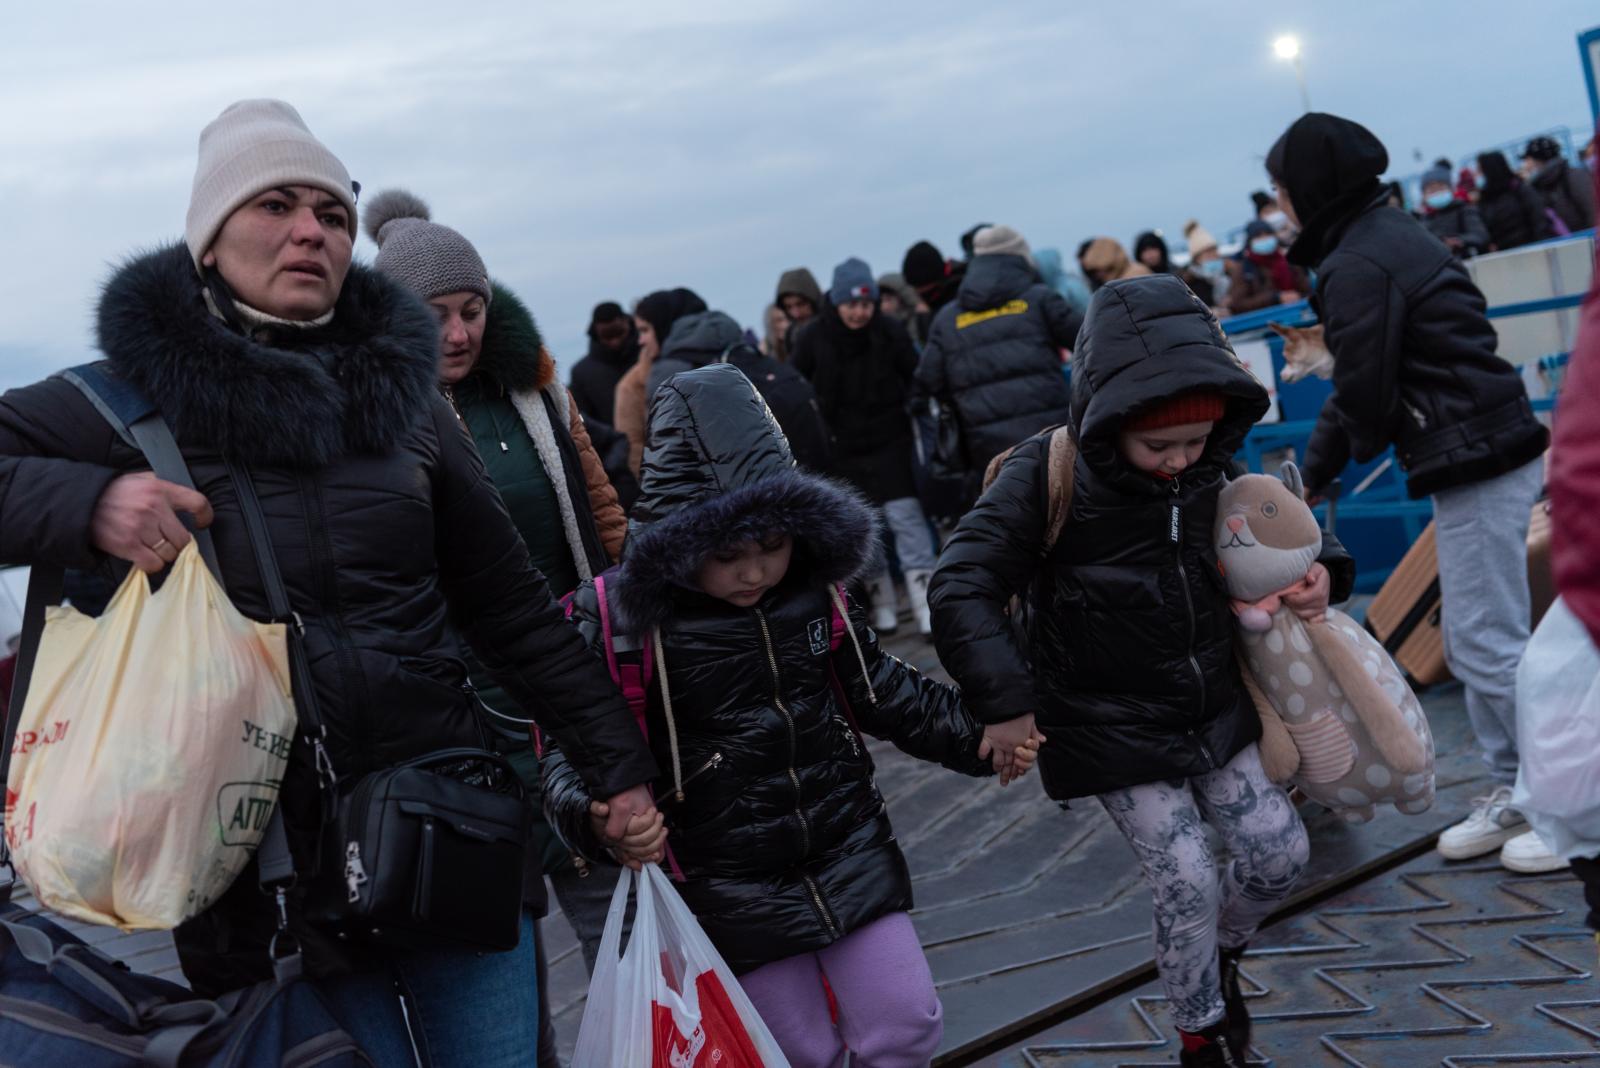 Ukrainian refugees arriving at the border station of Isaccea, Romania, February 27, 2022. | Buy this image